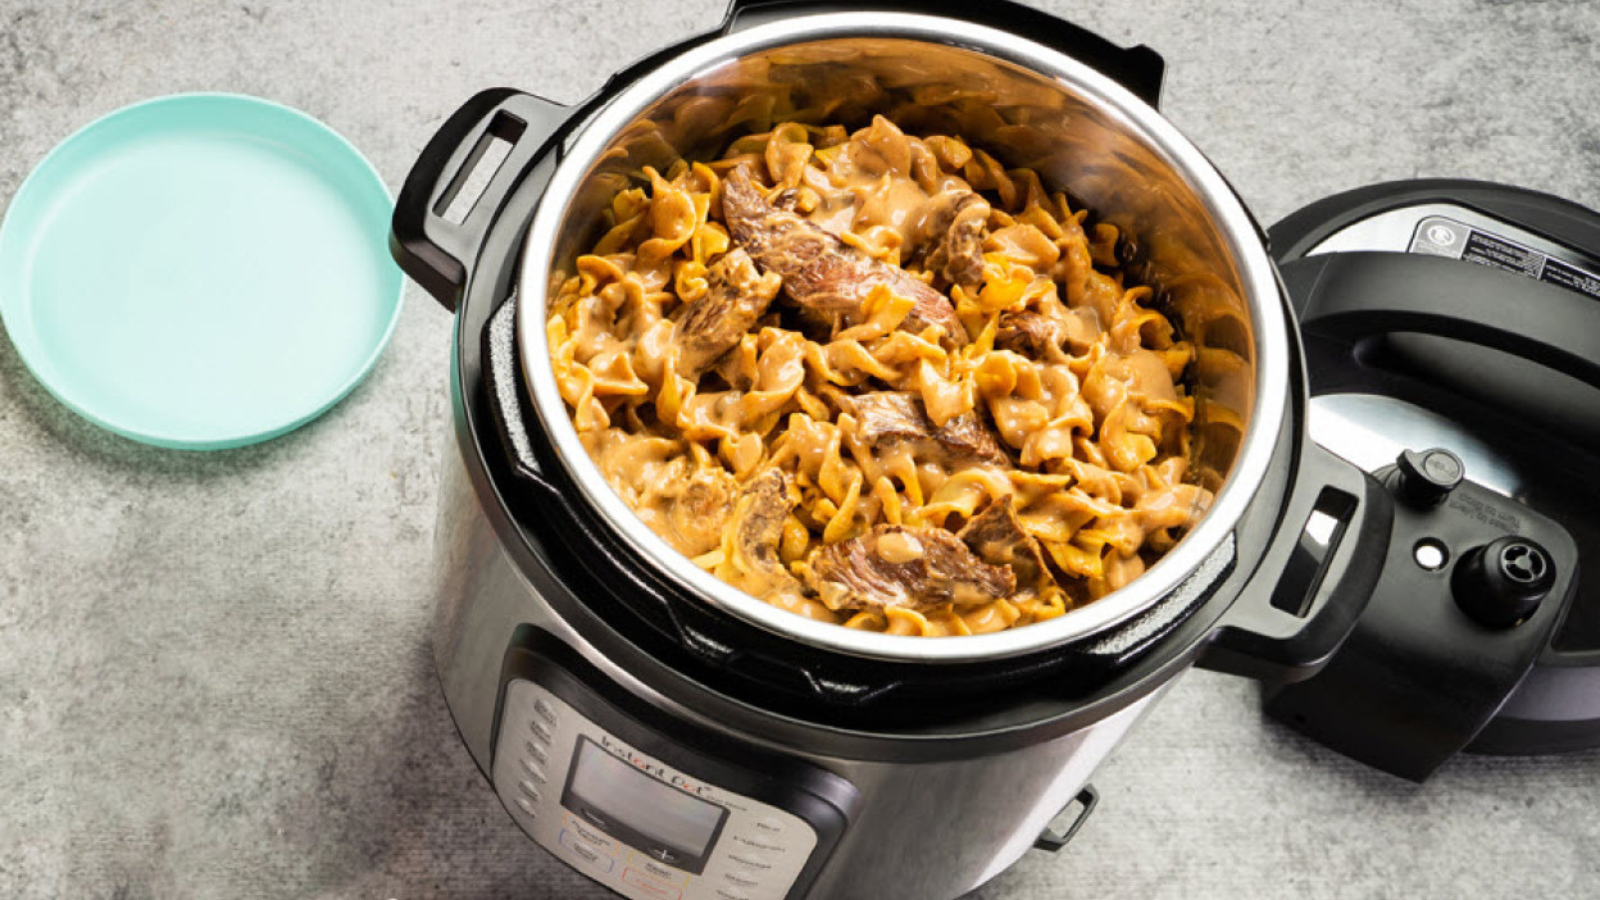 Instant Pot Duo 7-in-1 6-quart multi-cooker containing noodles and meat next to plate on a kitchen counter.